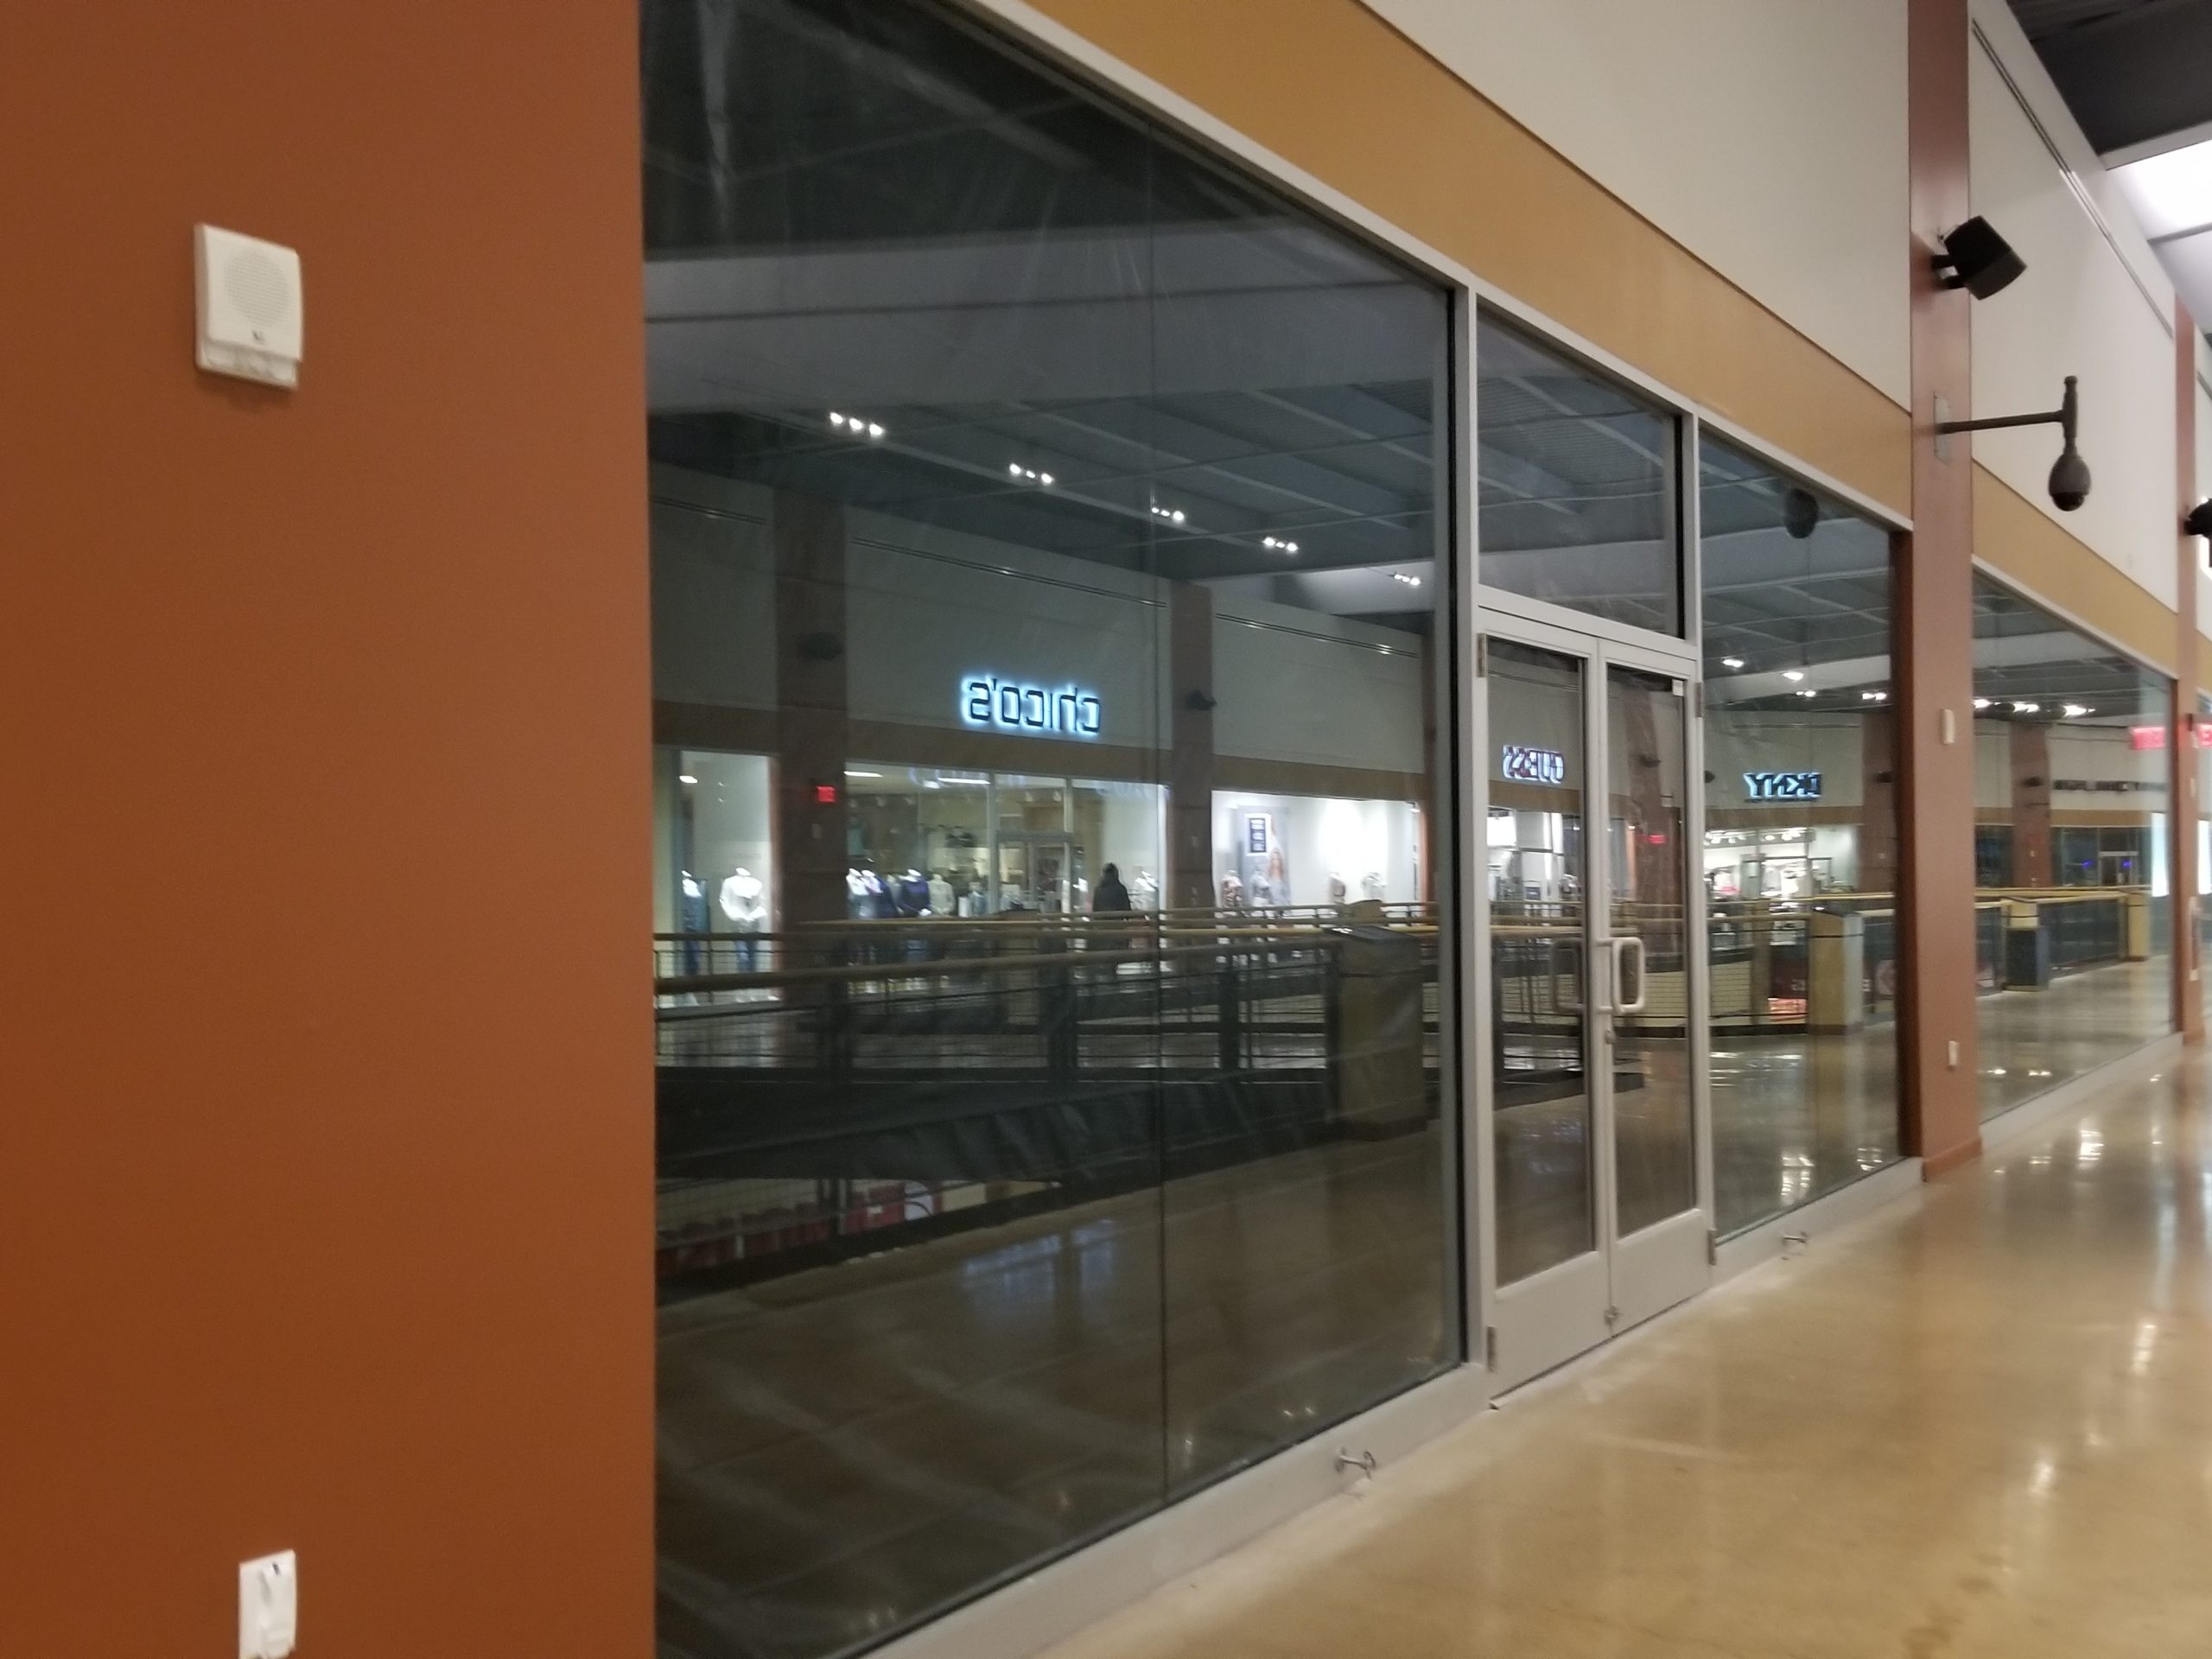 buurman Indica Isolator Under Armour Closes Store in Outlets at Wind Creek – Saucon Source